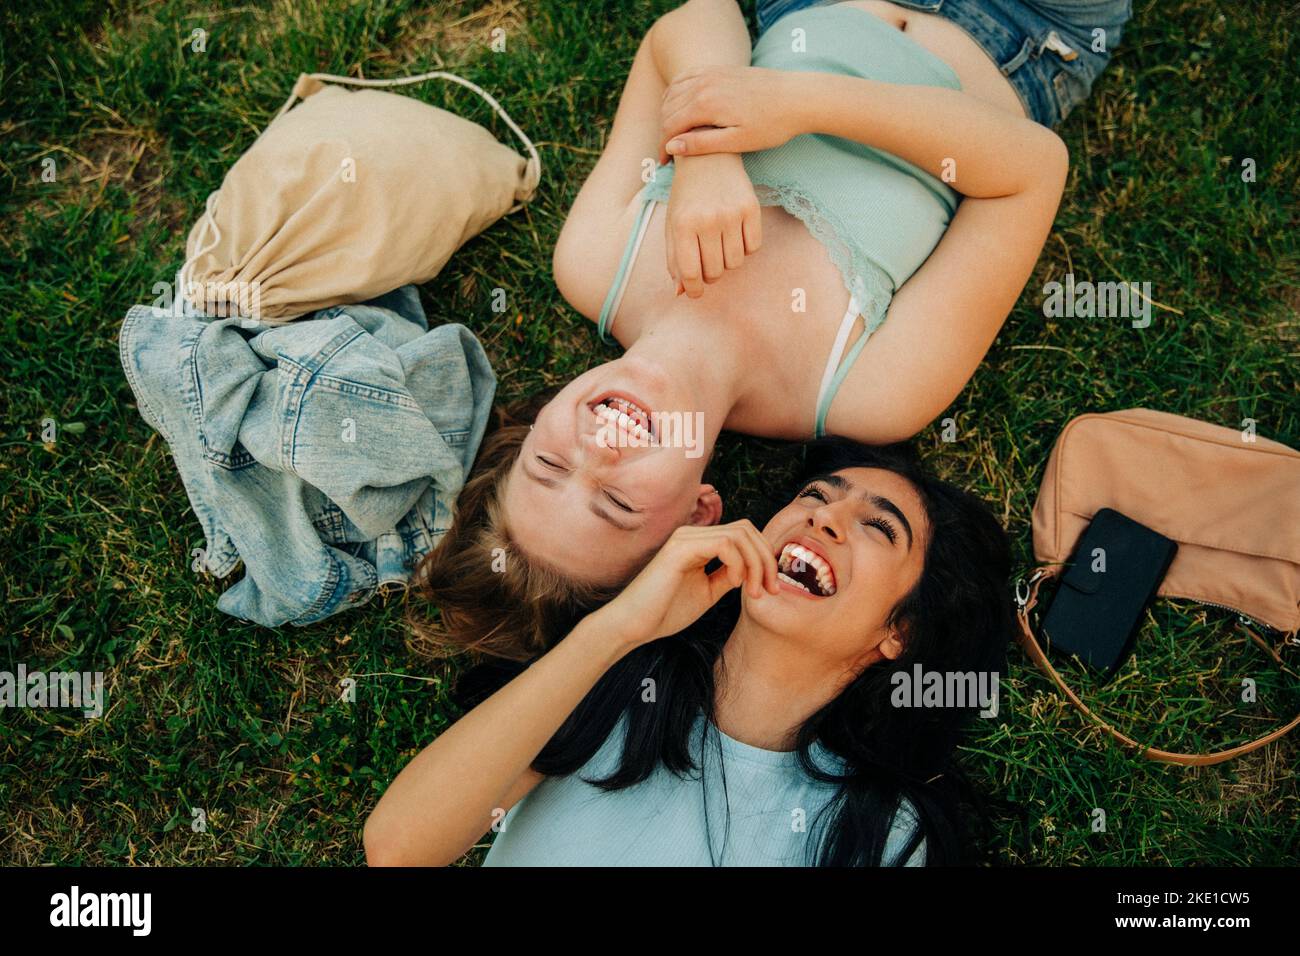 Cheerful teenage girls lying together at park Stock Photo